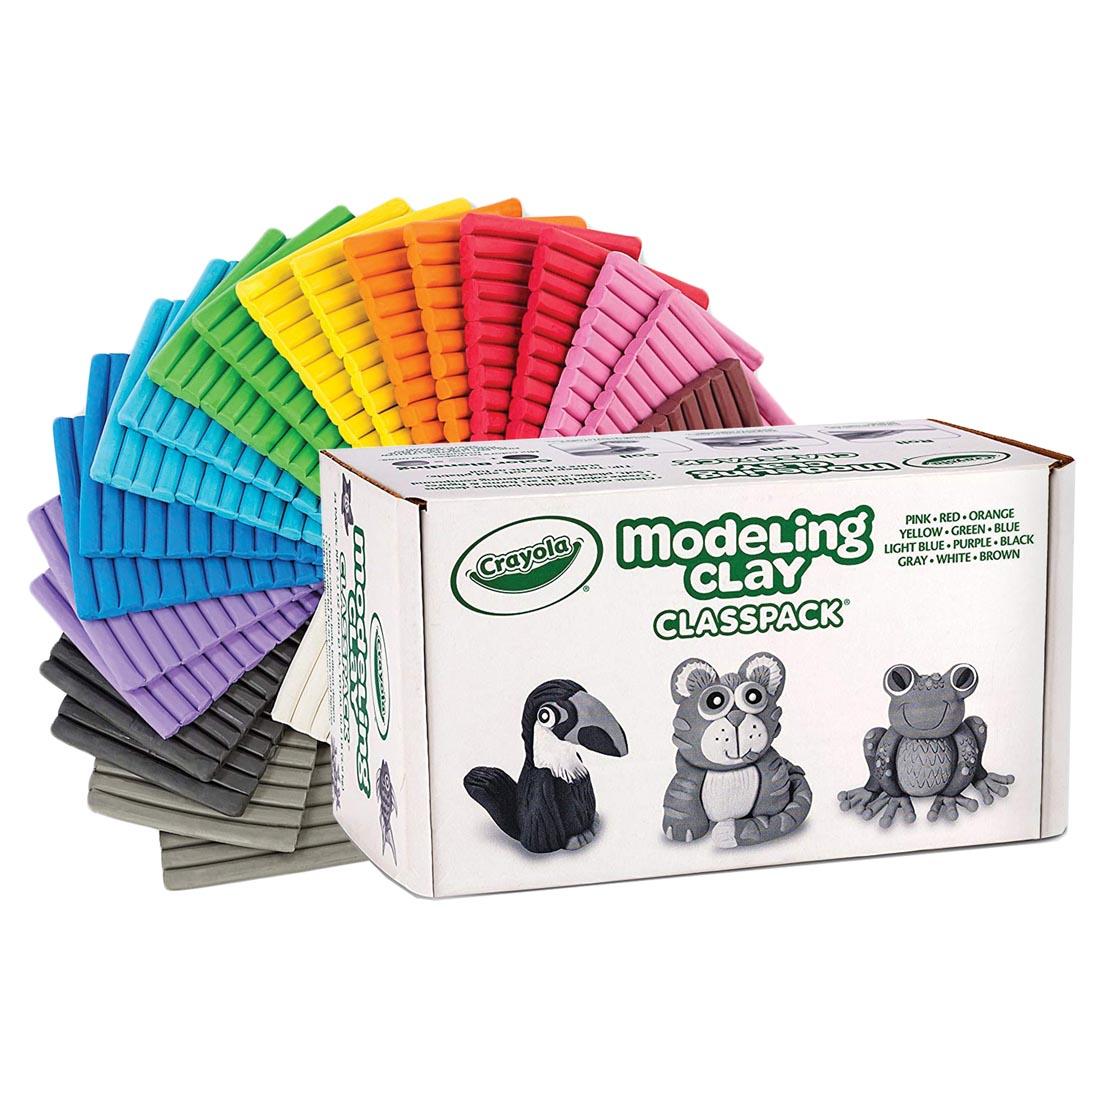 Crayola Modeling Clay Classpack box with colorful clay fanned out behind it